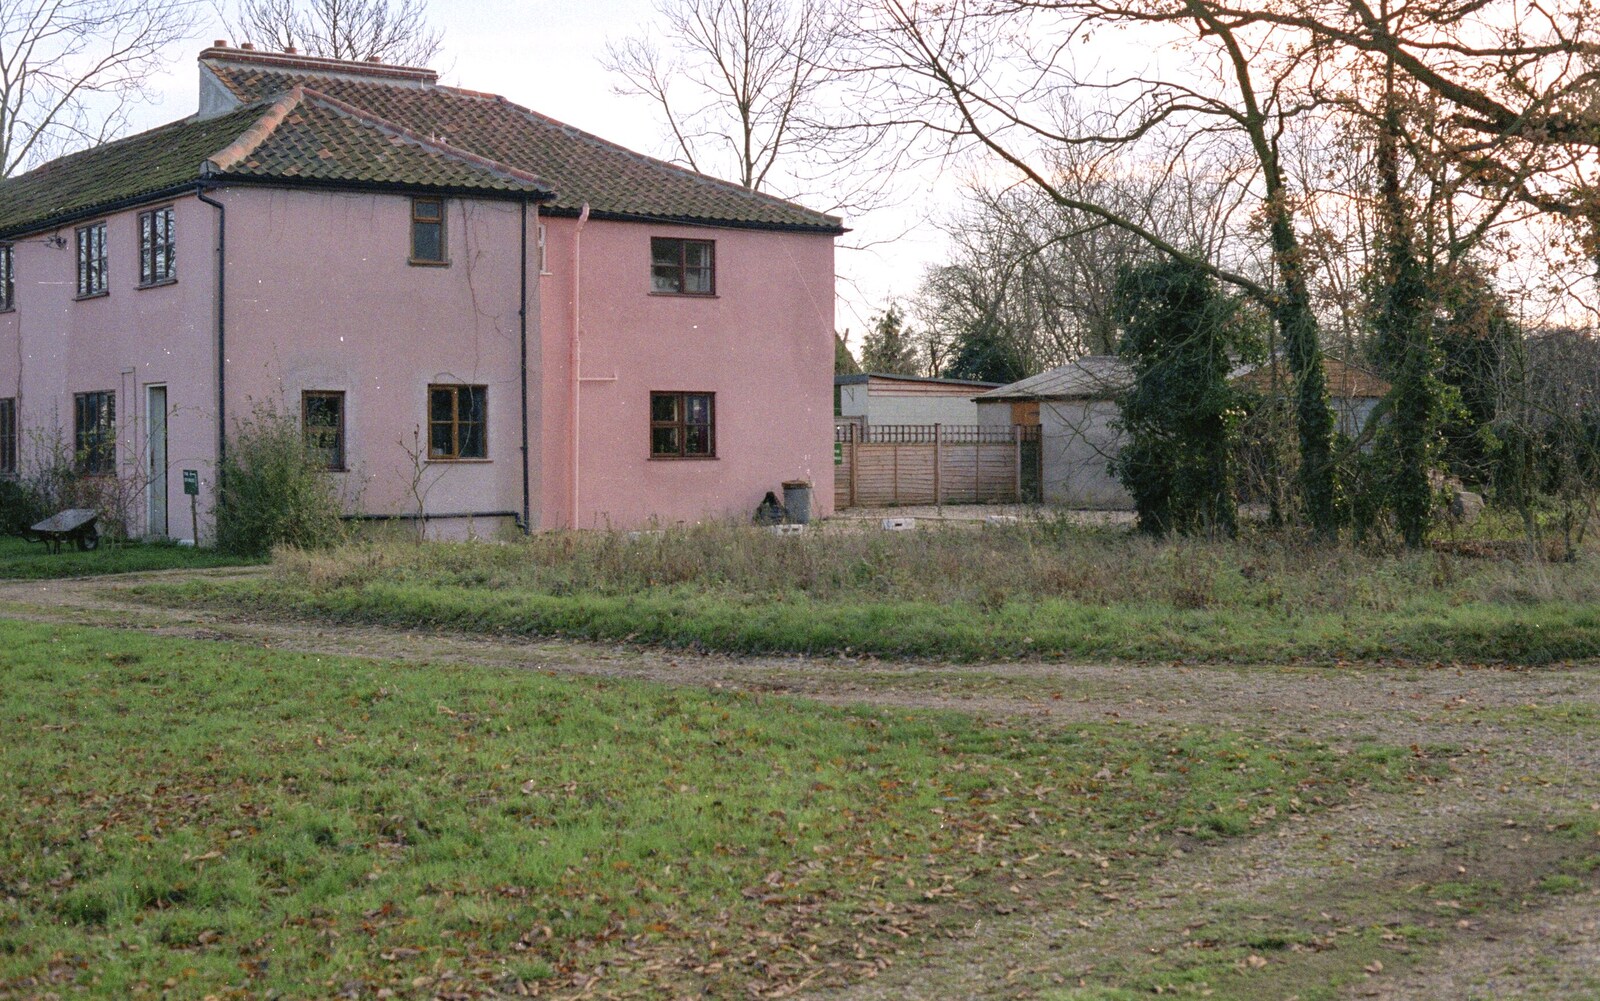 The outside of The Stables from The Old Man Visits, and a Frosty Stuston, Suffolk - 8th December 1989